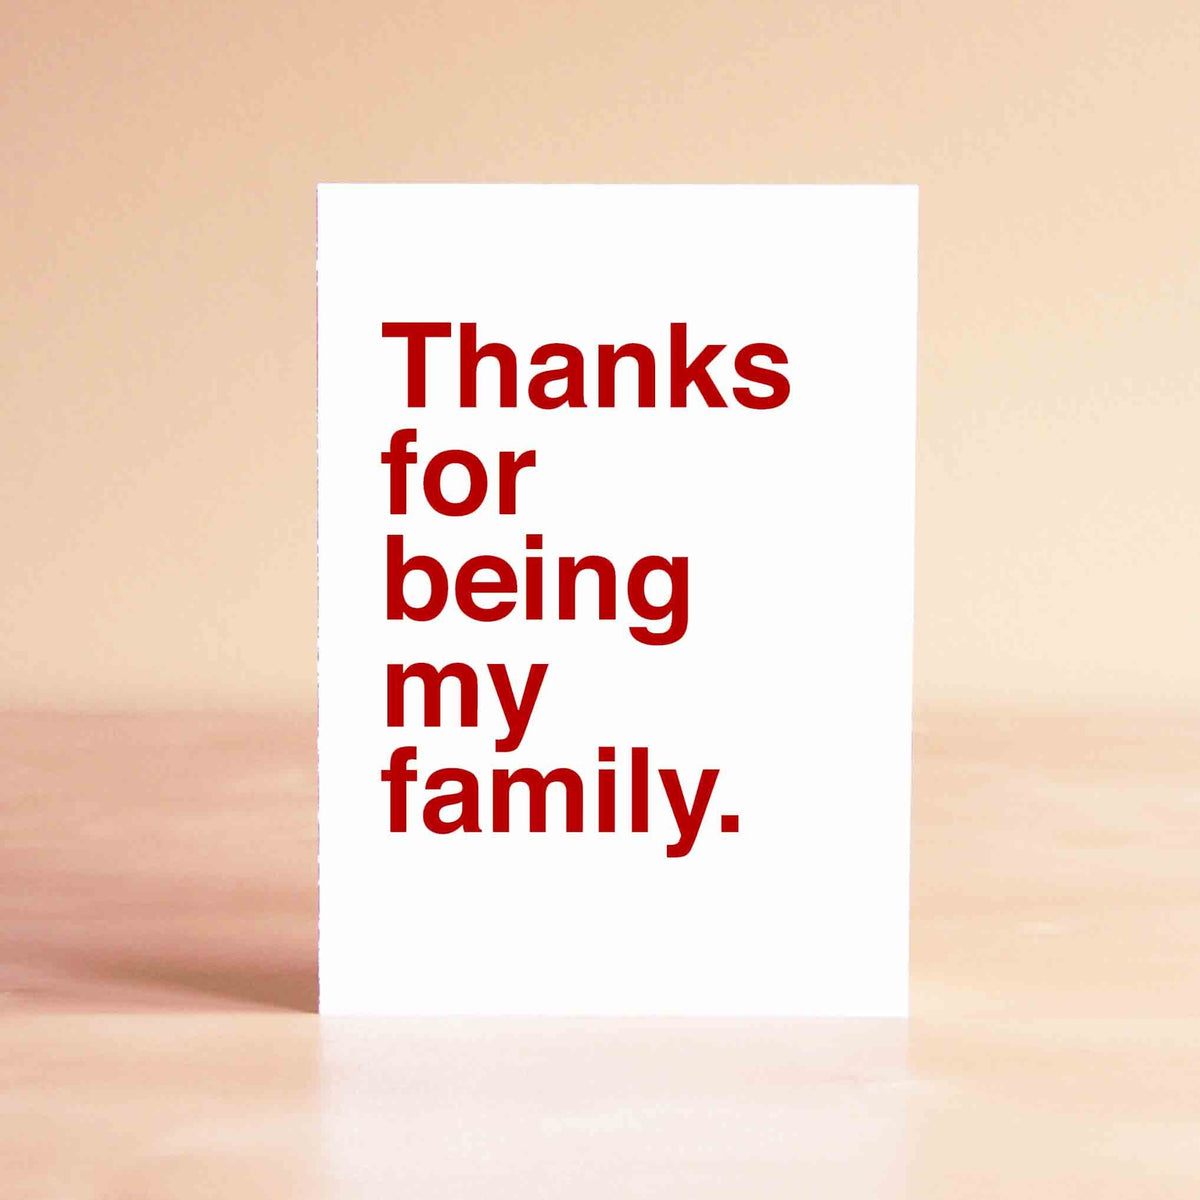 White card with red lettering reading "Thanks for being my family."